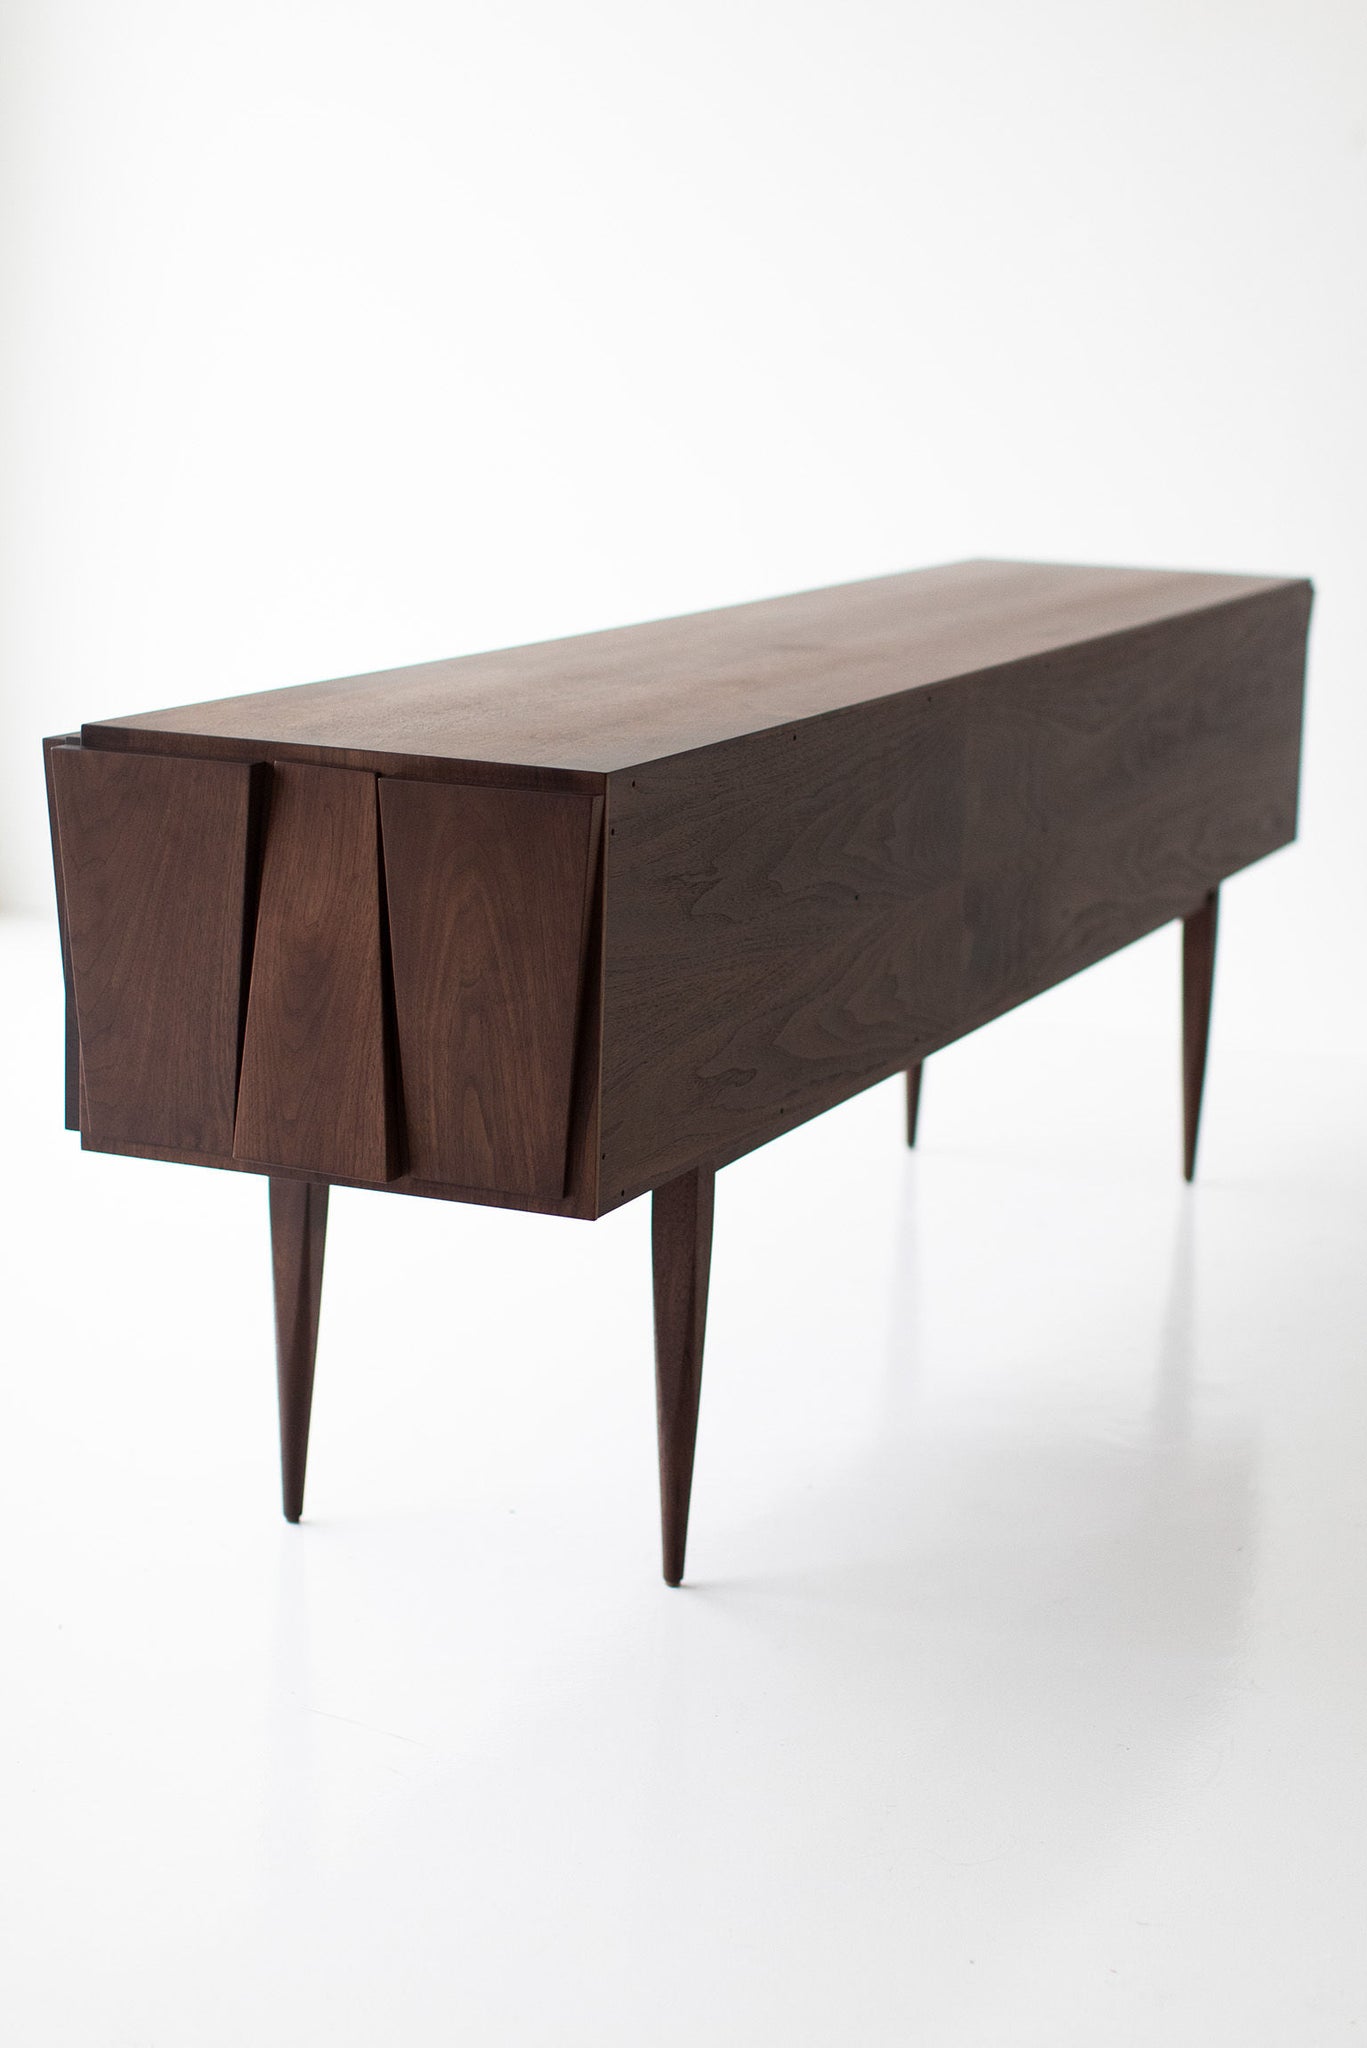 Eiger Modern Console Table 4 bay 1801, Image 06